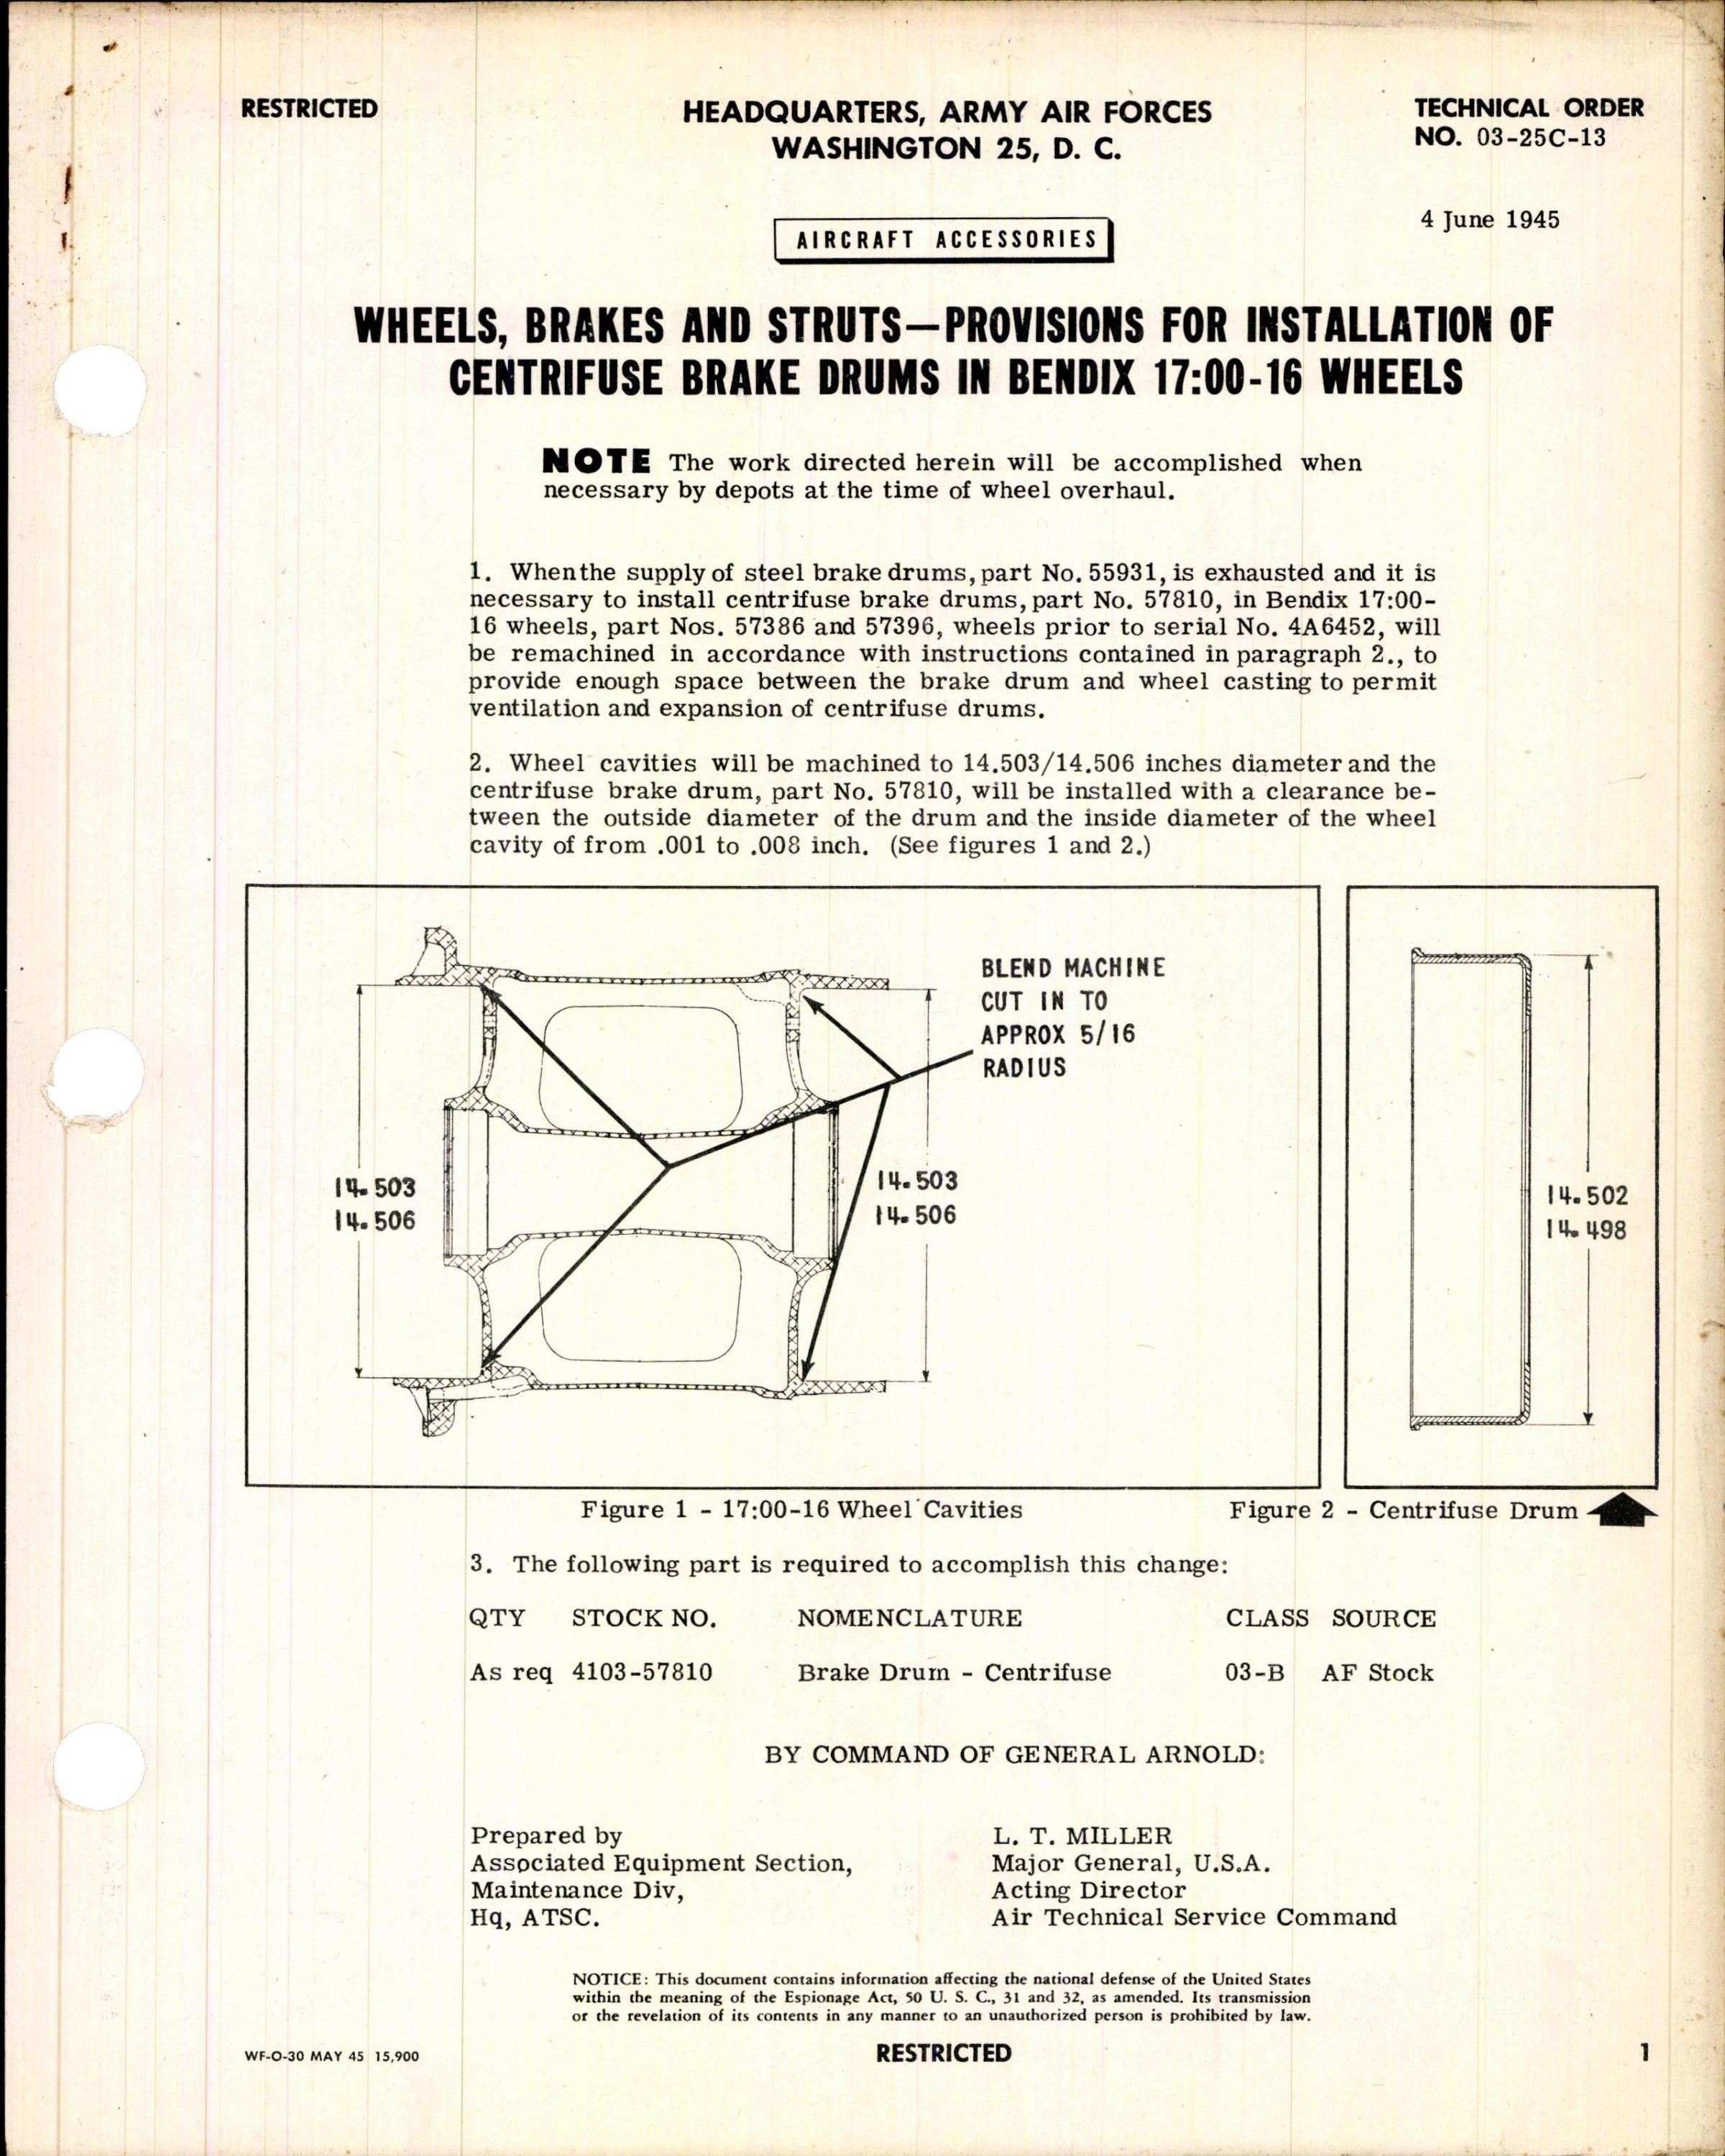 Sample page 1 from AirCorps Library document: Wheels, Brakes and Struts - Provisions for Installation of Centrifuse Brake Drums in Bendix 17:00-16 Wheels